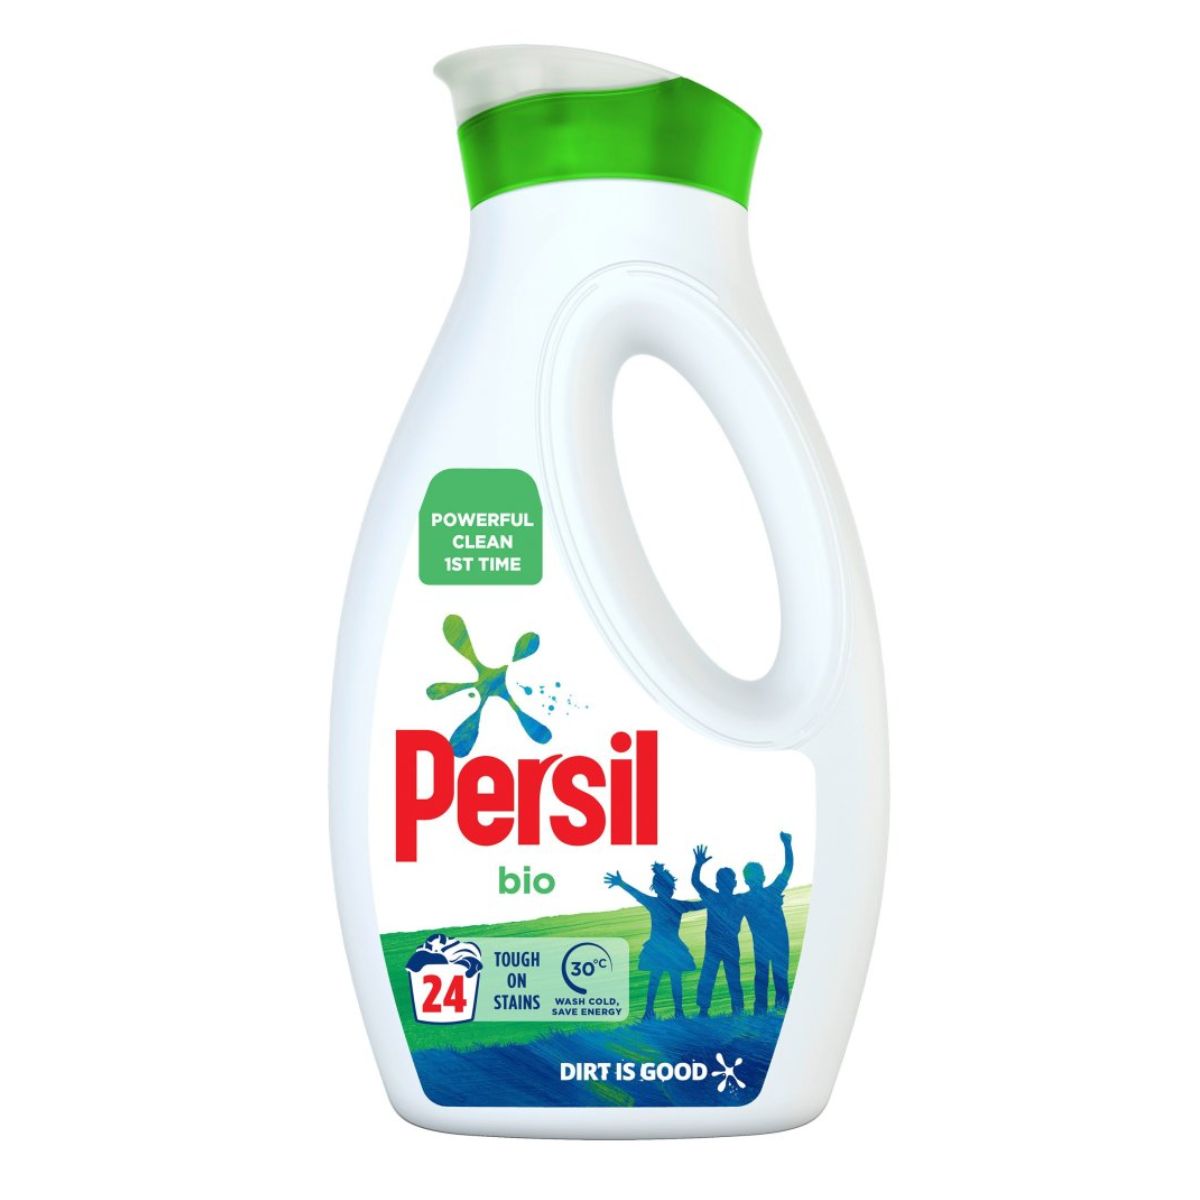 A bottle of Persil - Bio Laundry Washing Liquid Detergent 24 Wash - 648ml on a white background.